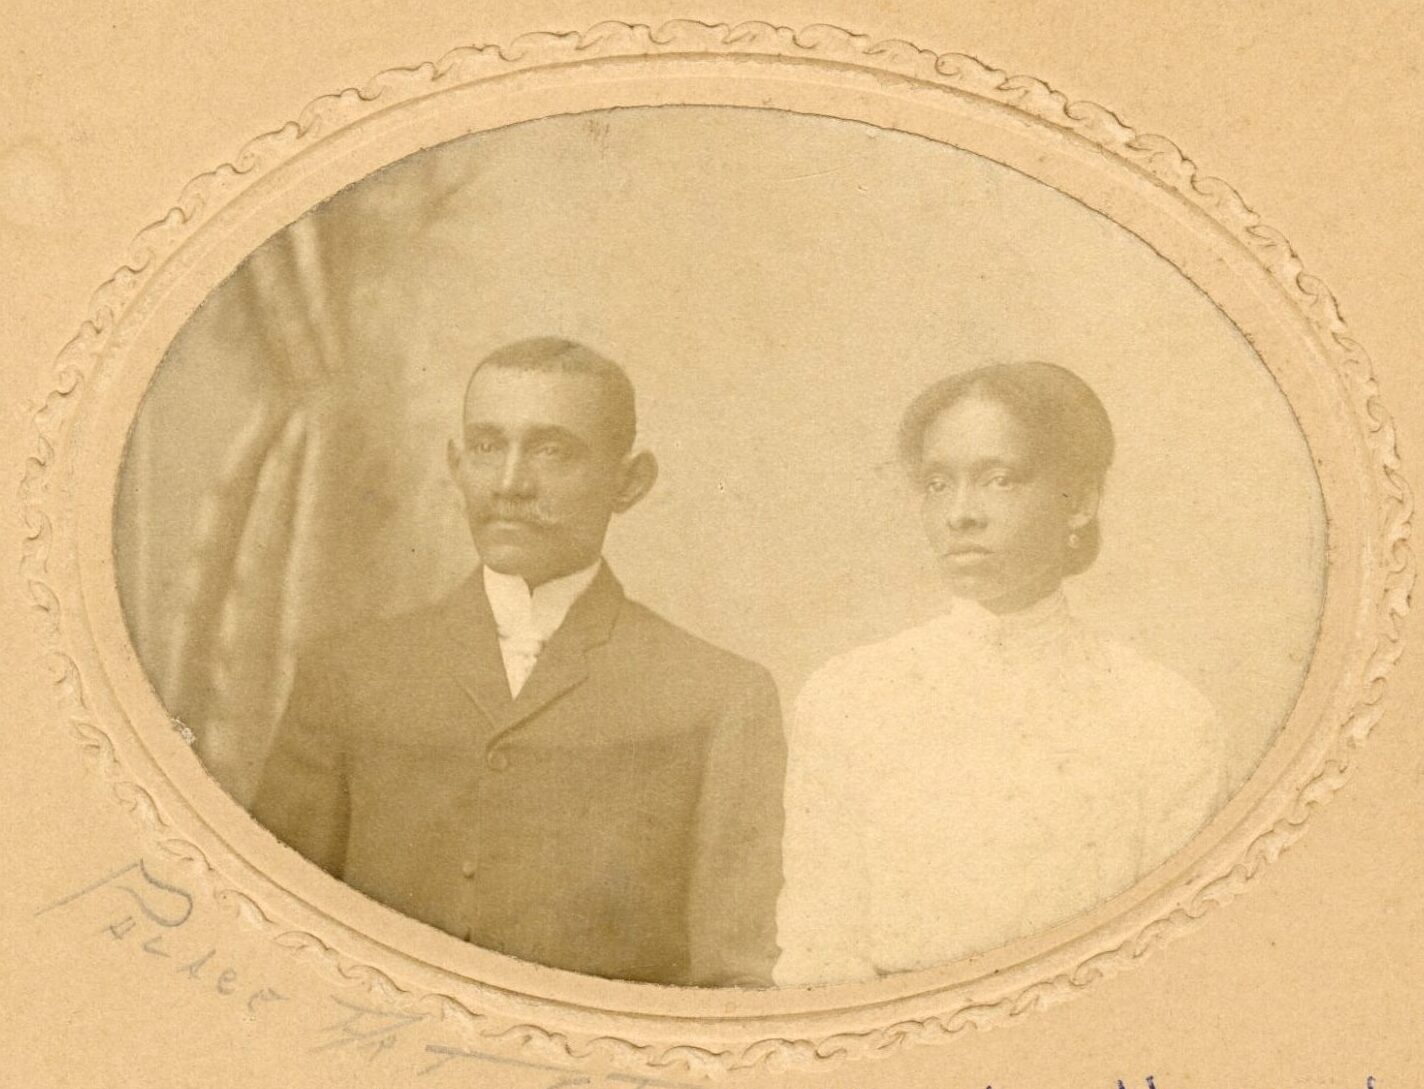 Studio photograph of a Black man and woman in front of a studio backdrop.